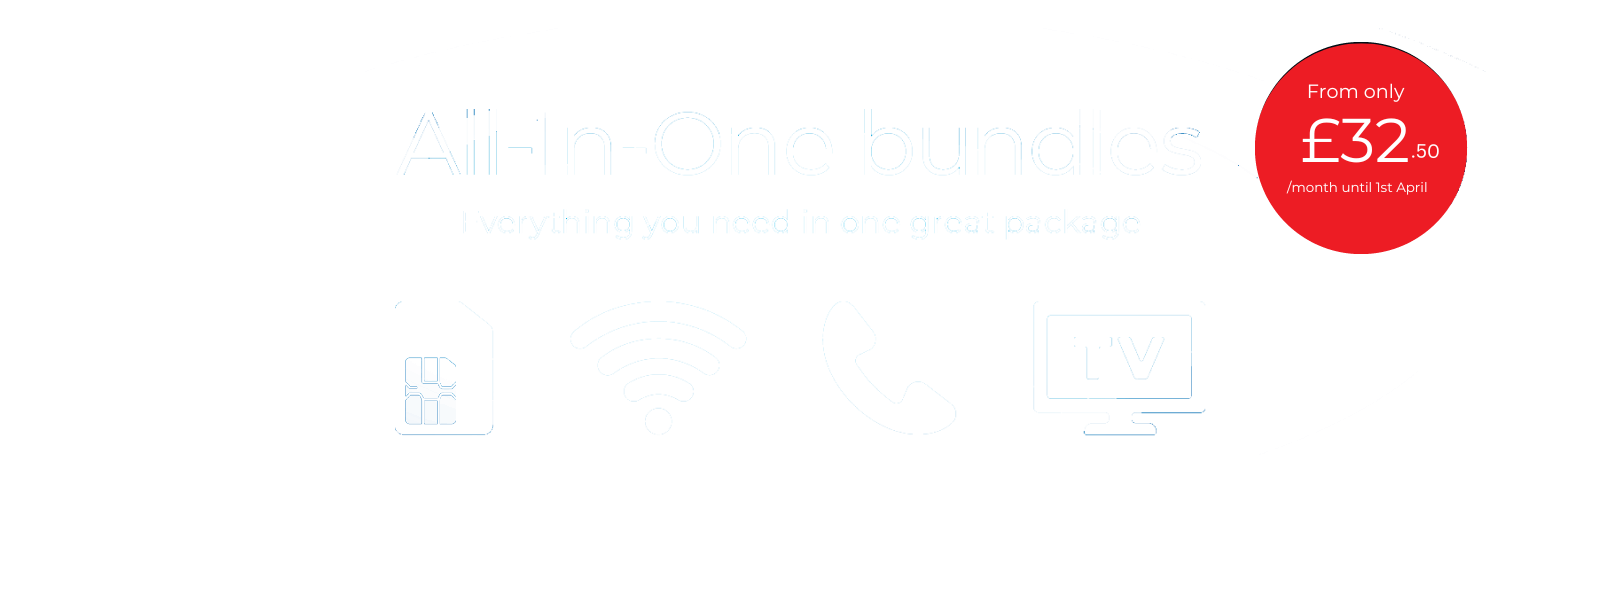 All in one bundles Black Friday Deal image